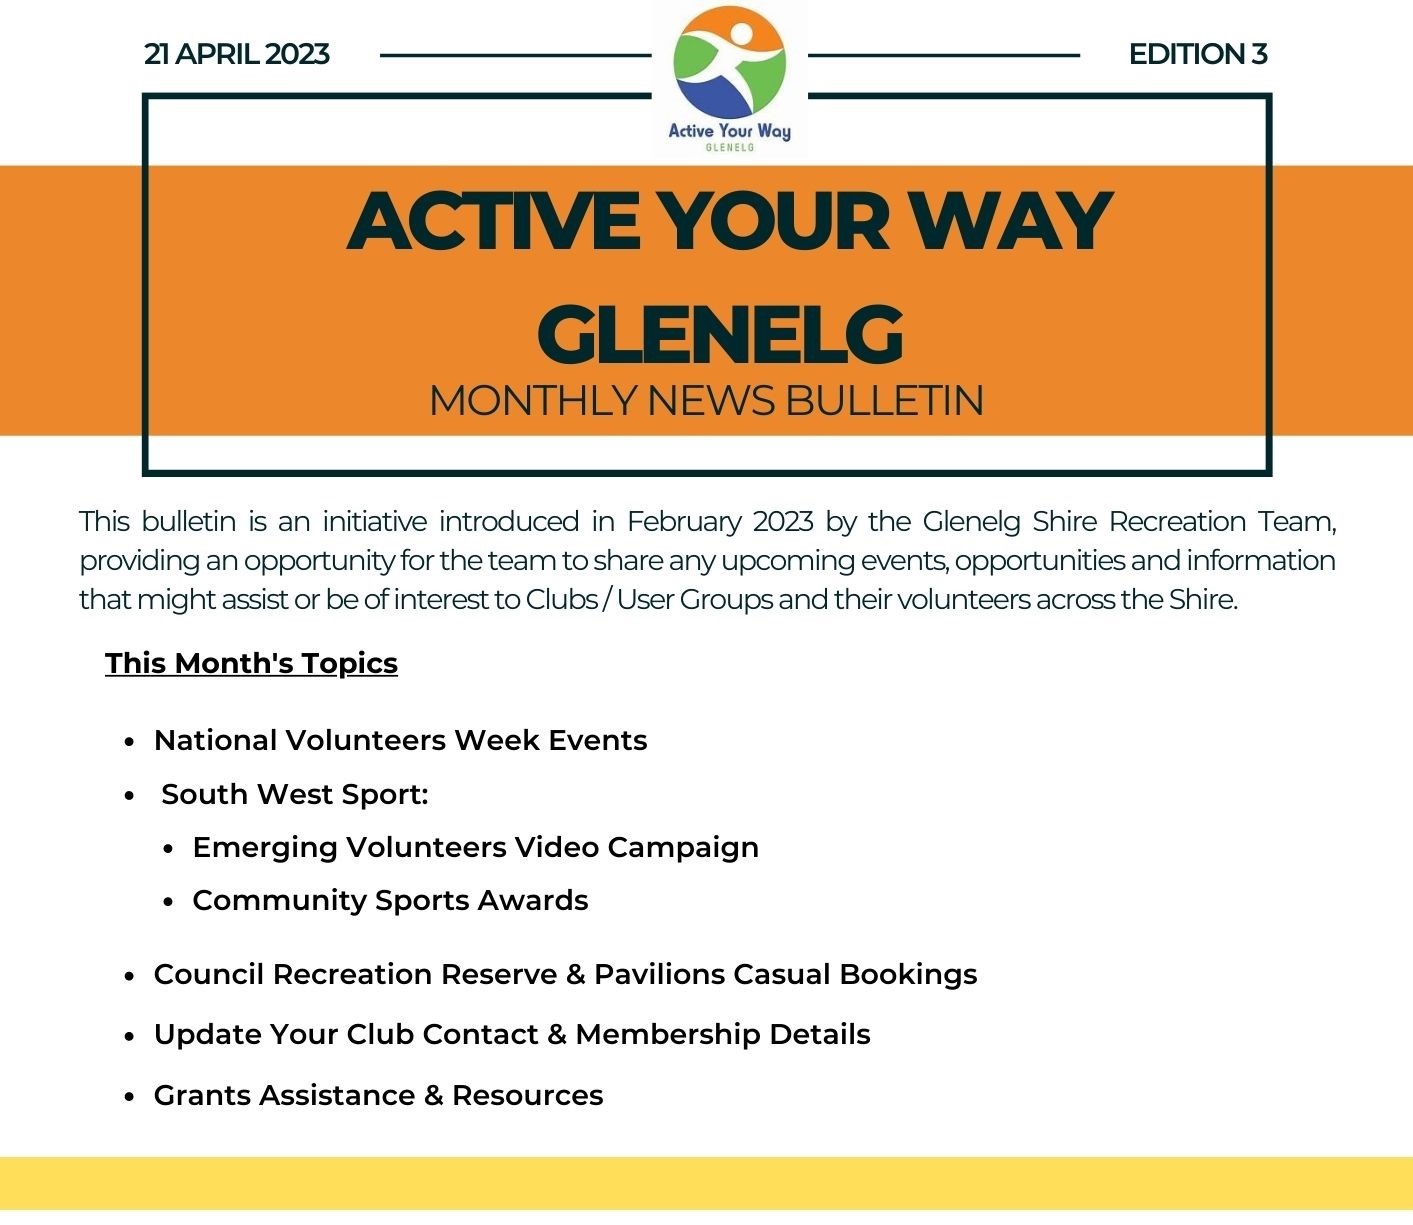 Active Your Way Glenelg Monthly News Bulletin April 2023